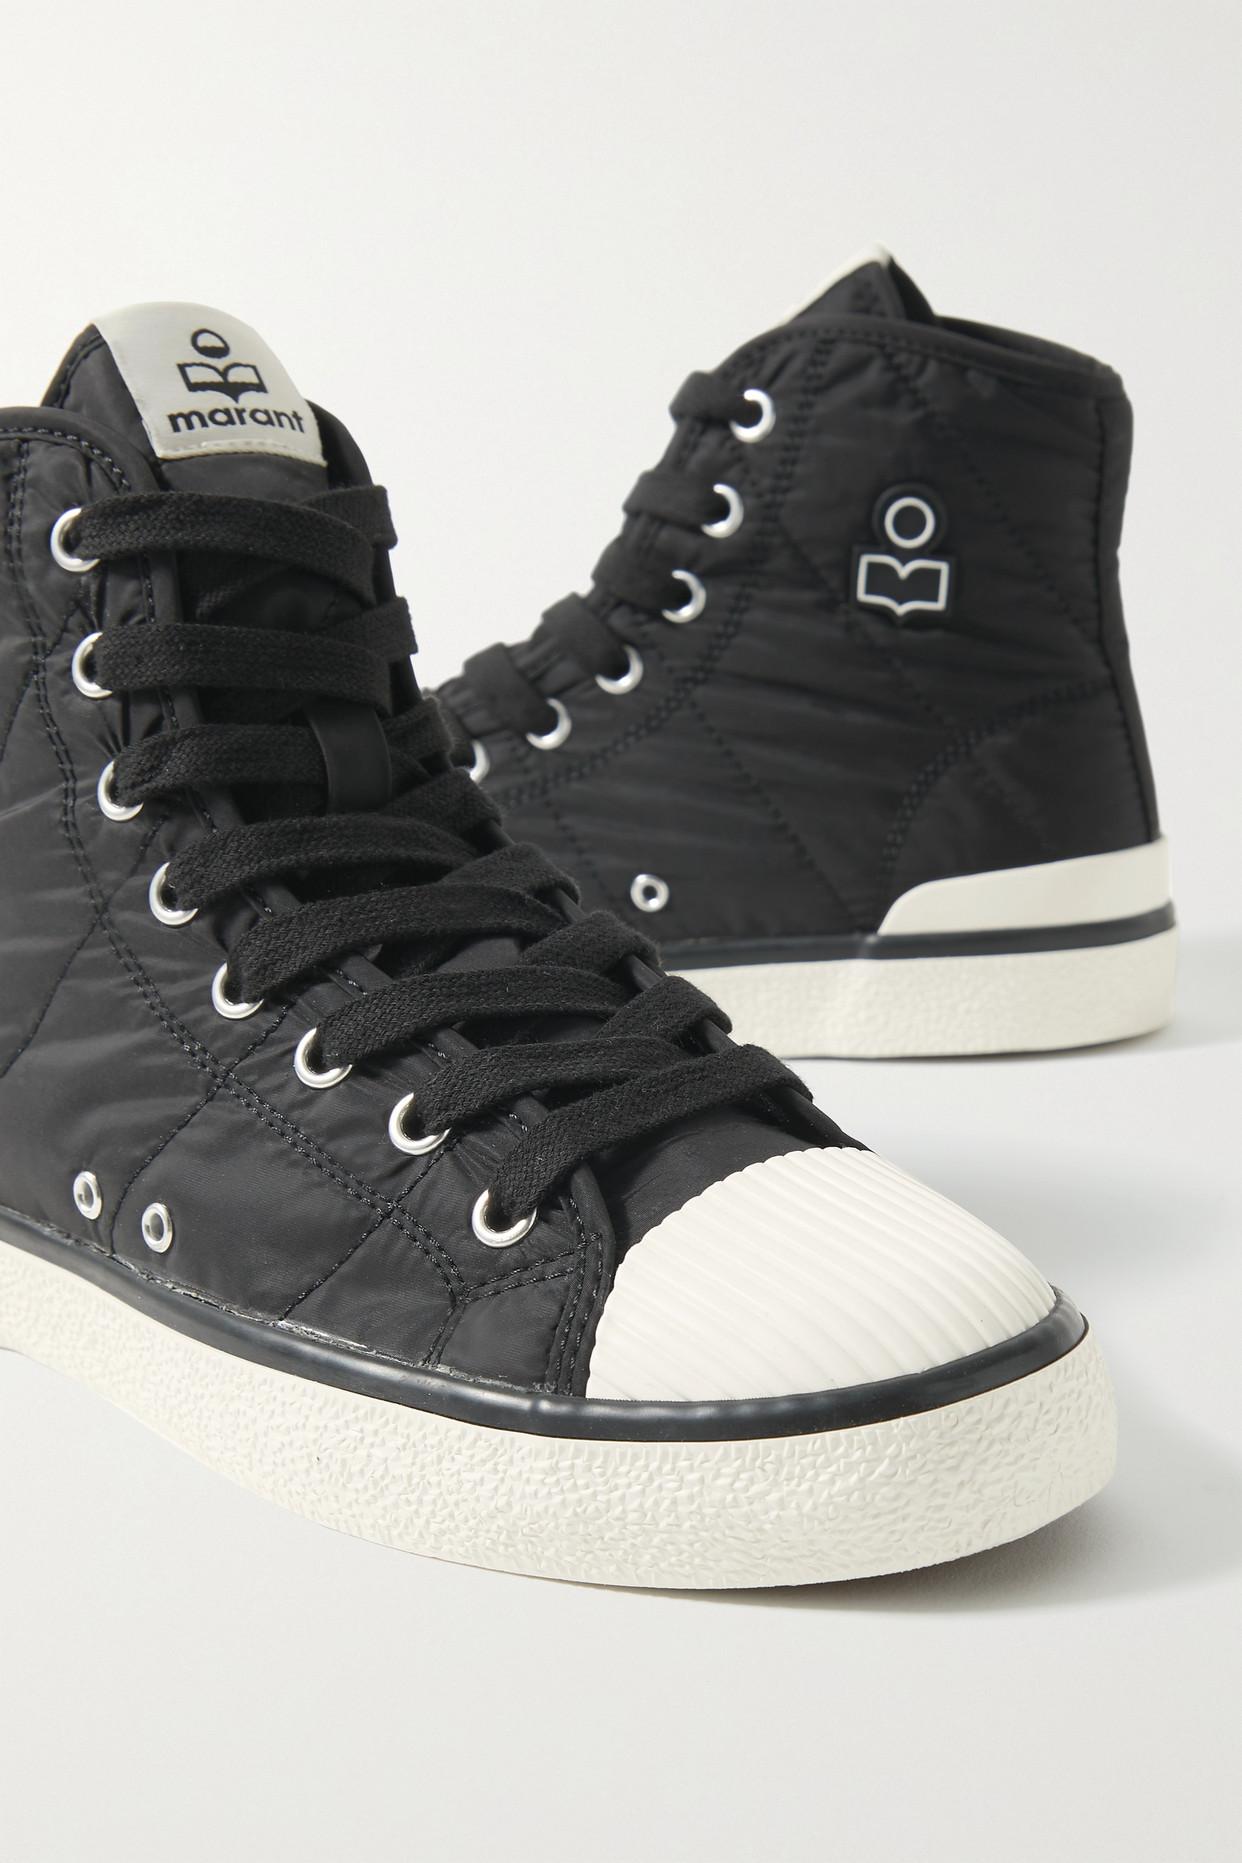 Isabel Marant Benkeen Quilted Shell High-top Sneakers in Black | Lyst